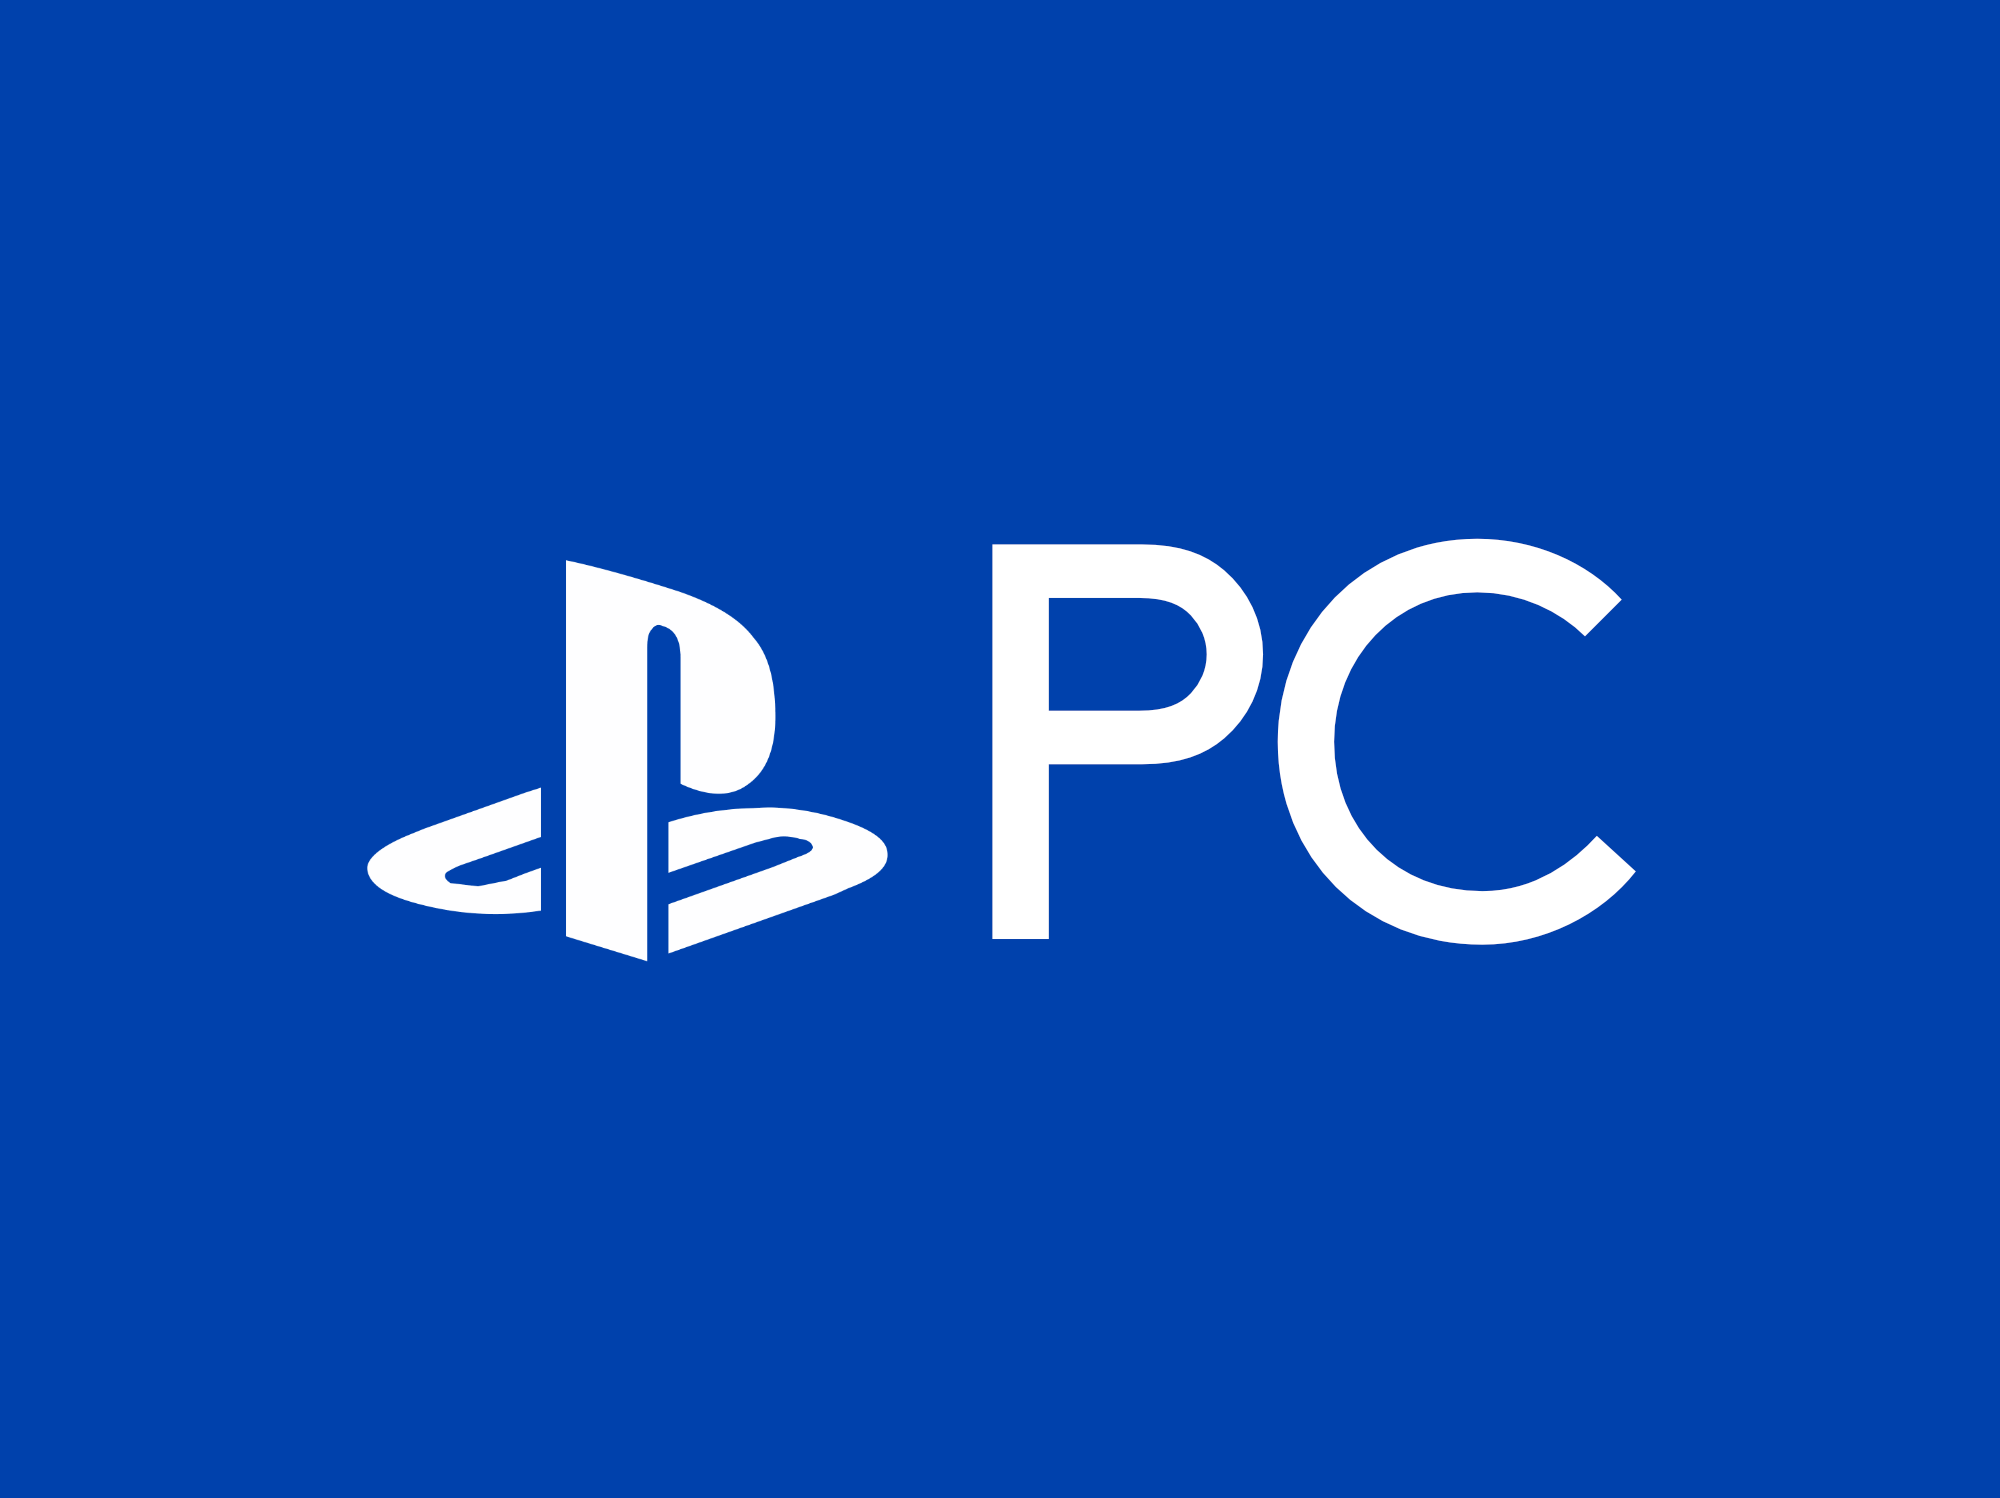 Sony will now use a PlayStation PC label for its PC games